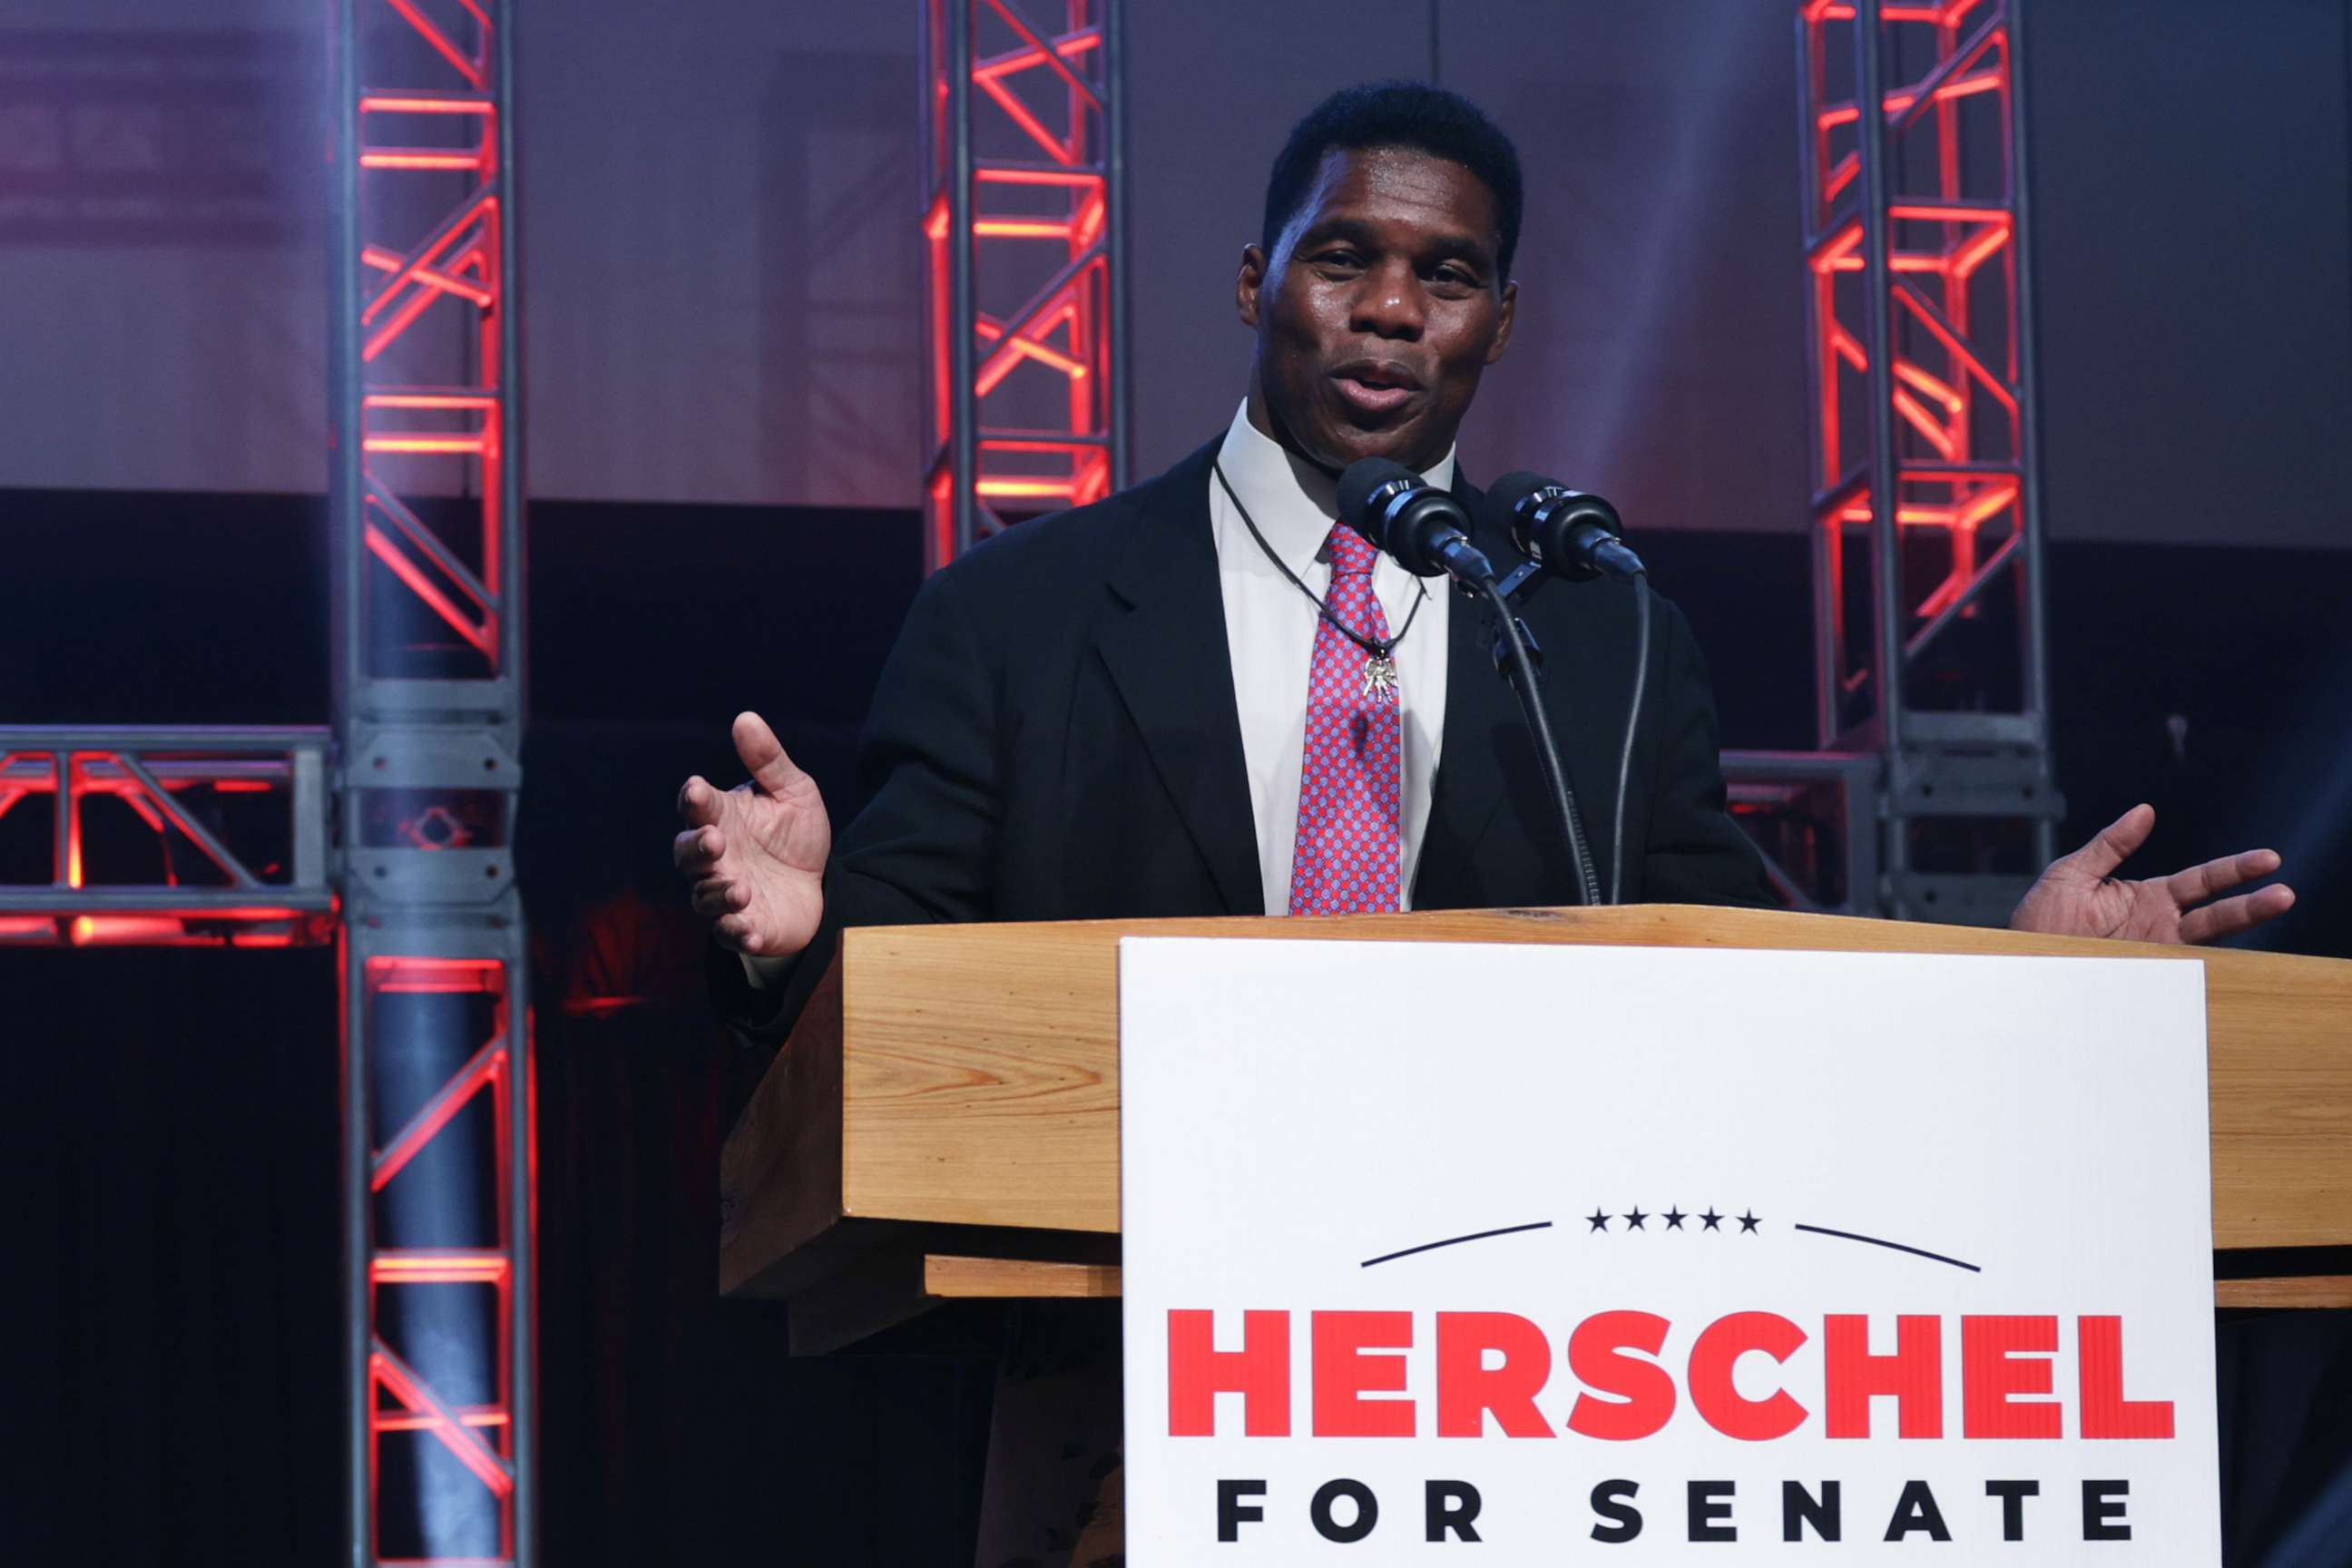 PHOTO: Georgia Republican Senate candidate Herschel Walker delivers his concession speech during an election night event at the College Football Hall of Fame, Dec. 6, 2022, in Atlanta.